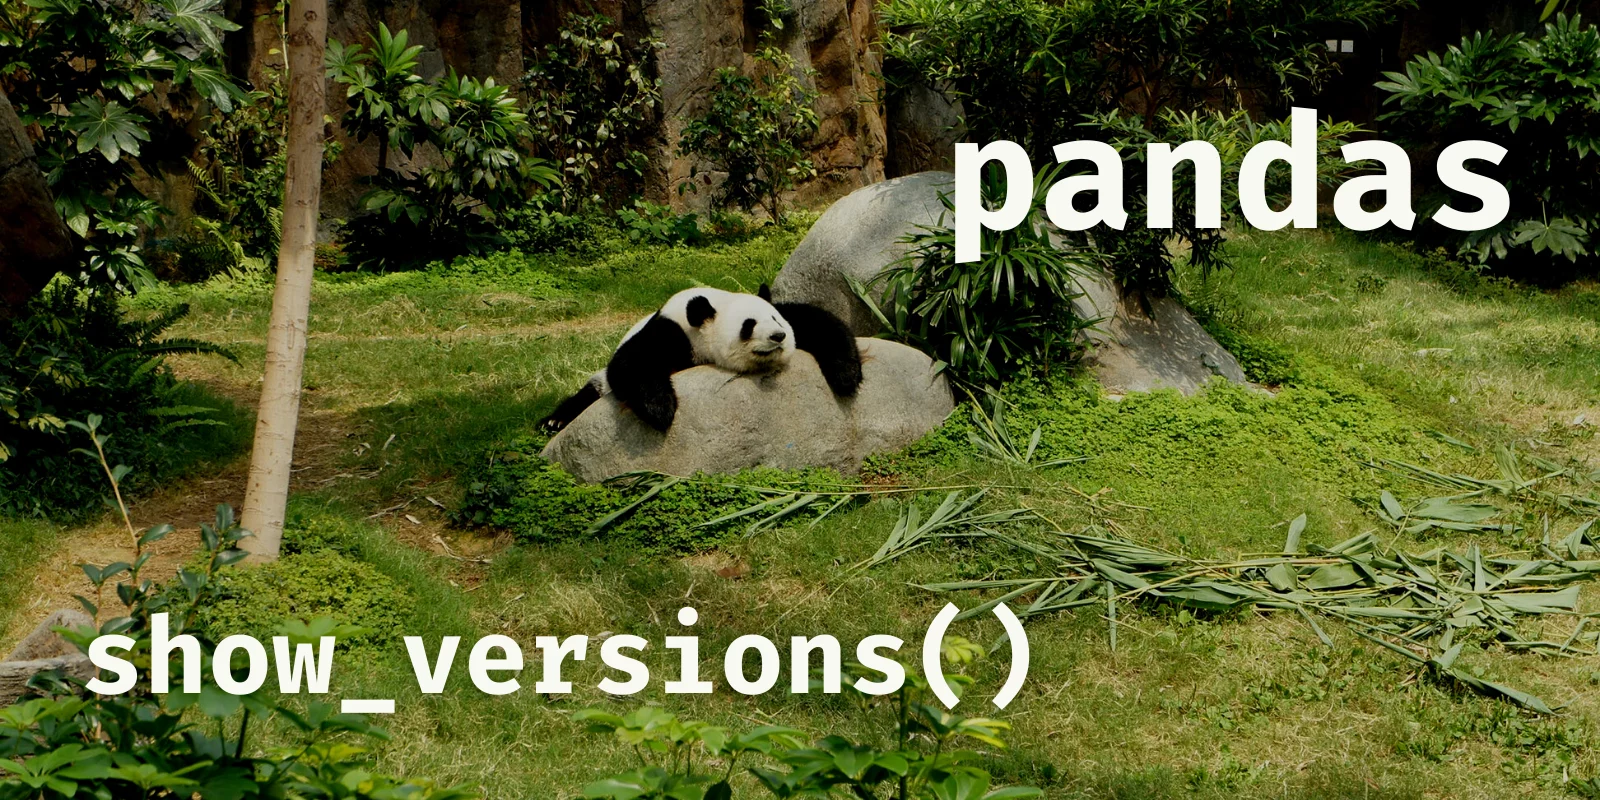 A picture of panda (the mammal) with the words "pandas" and "show_versions()" written.